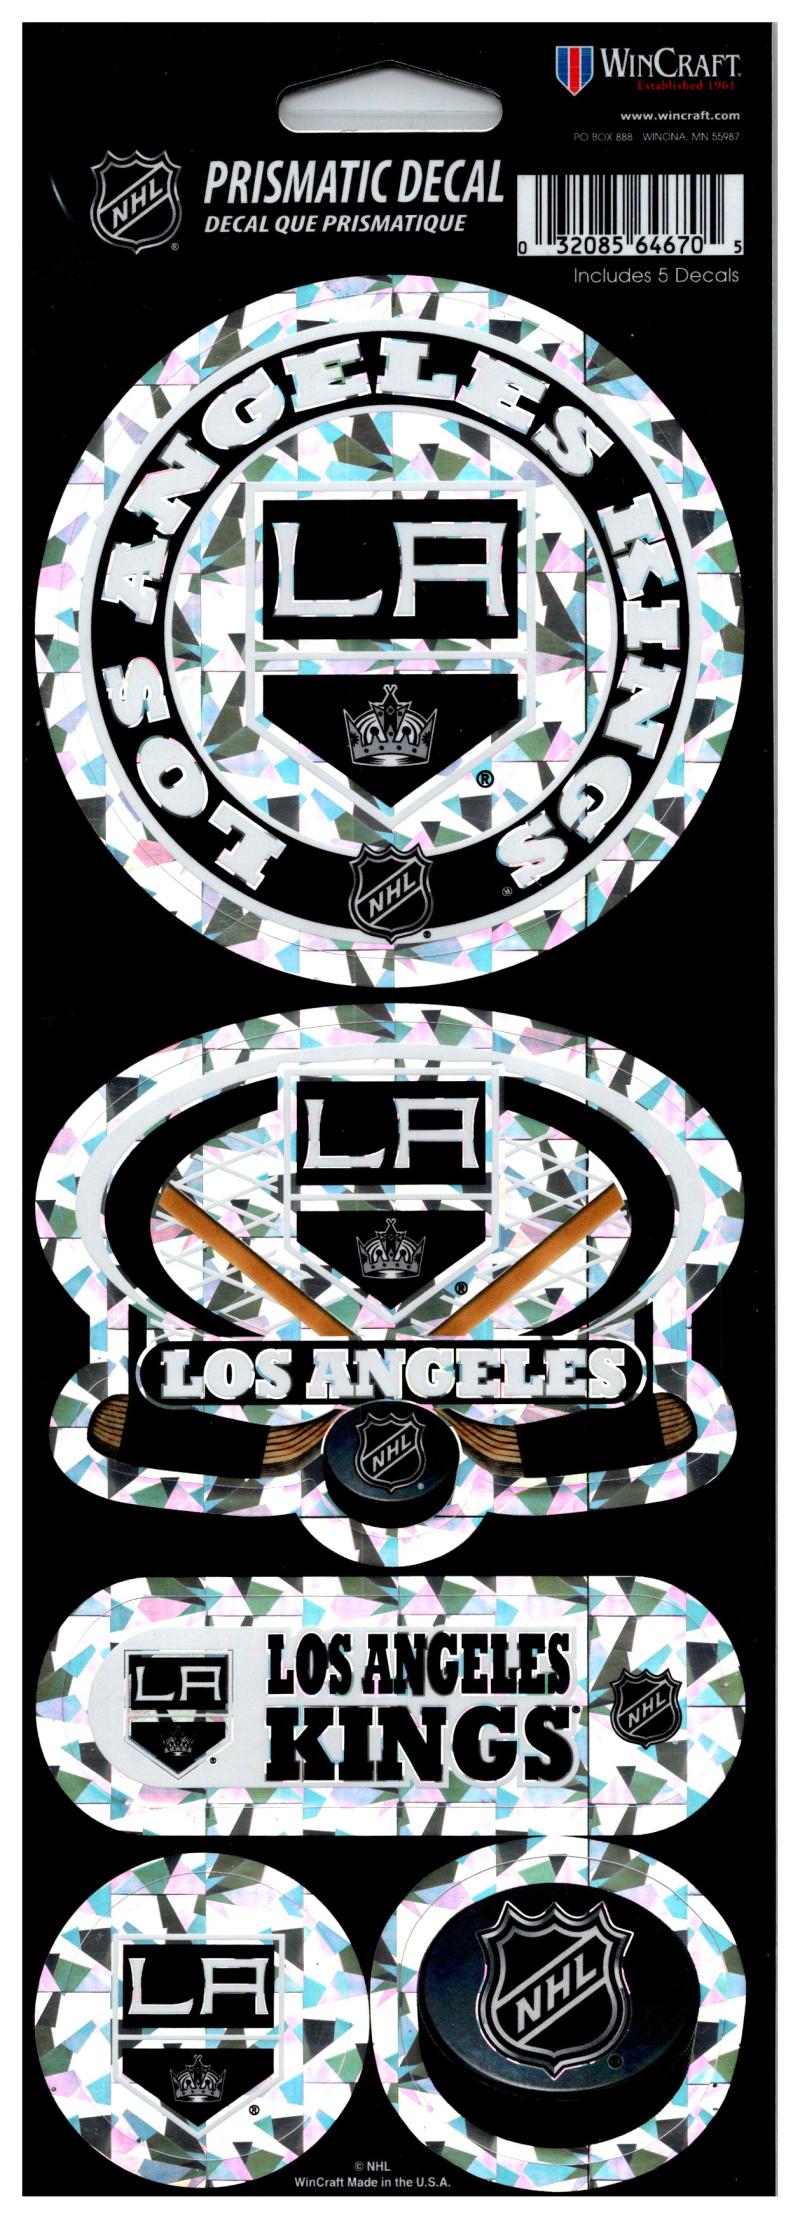 (HCW) Los Angeles Kings Prismatic 4"x11" Shiny Decals Sticker Sheet Image 1